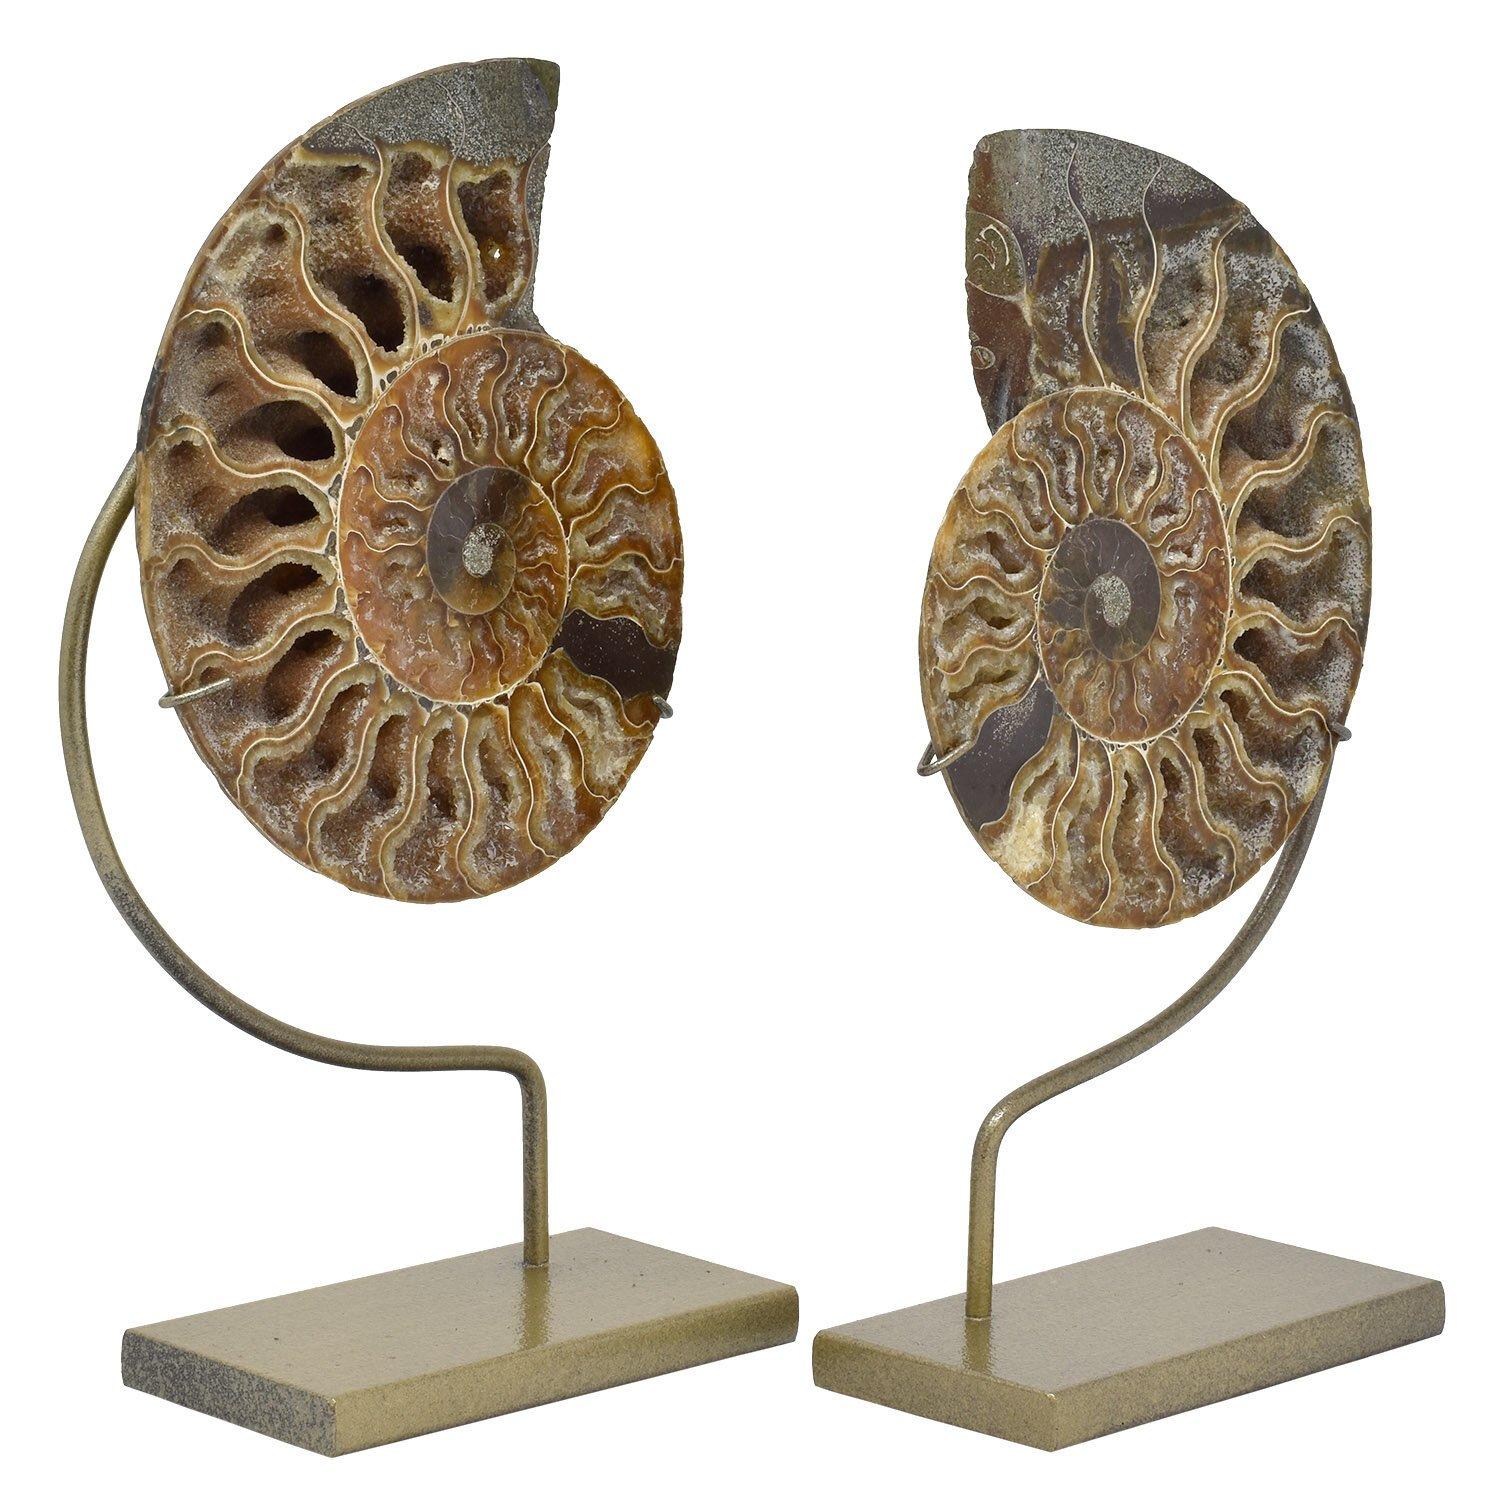 Matched Pair Split Ammonite fossil mineral specimens

Jurassic - Cretaceous Period, 200 - 145 million years old
Measures: 5 x 4.25 x 0.5 in. / 13 x 10 x 1.5 cm
Height on custom display stands: 8 in. / 20 cm

An excellent quality split ammonite